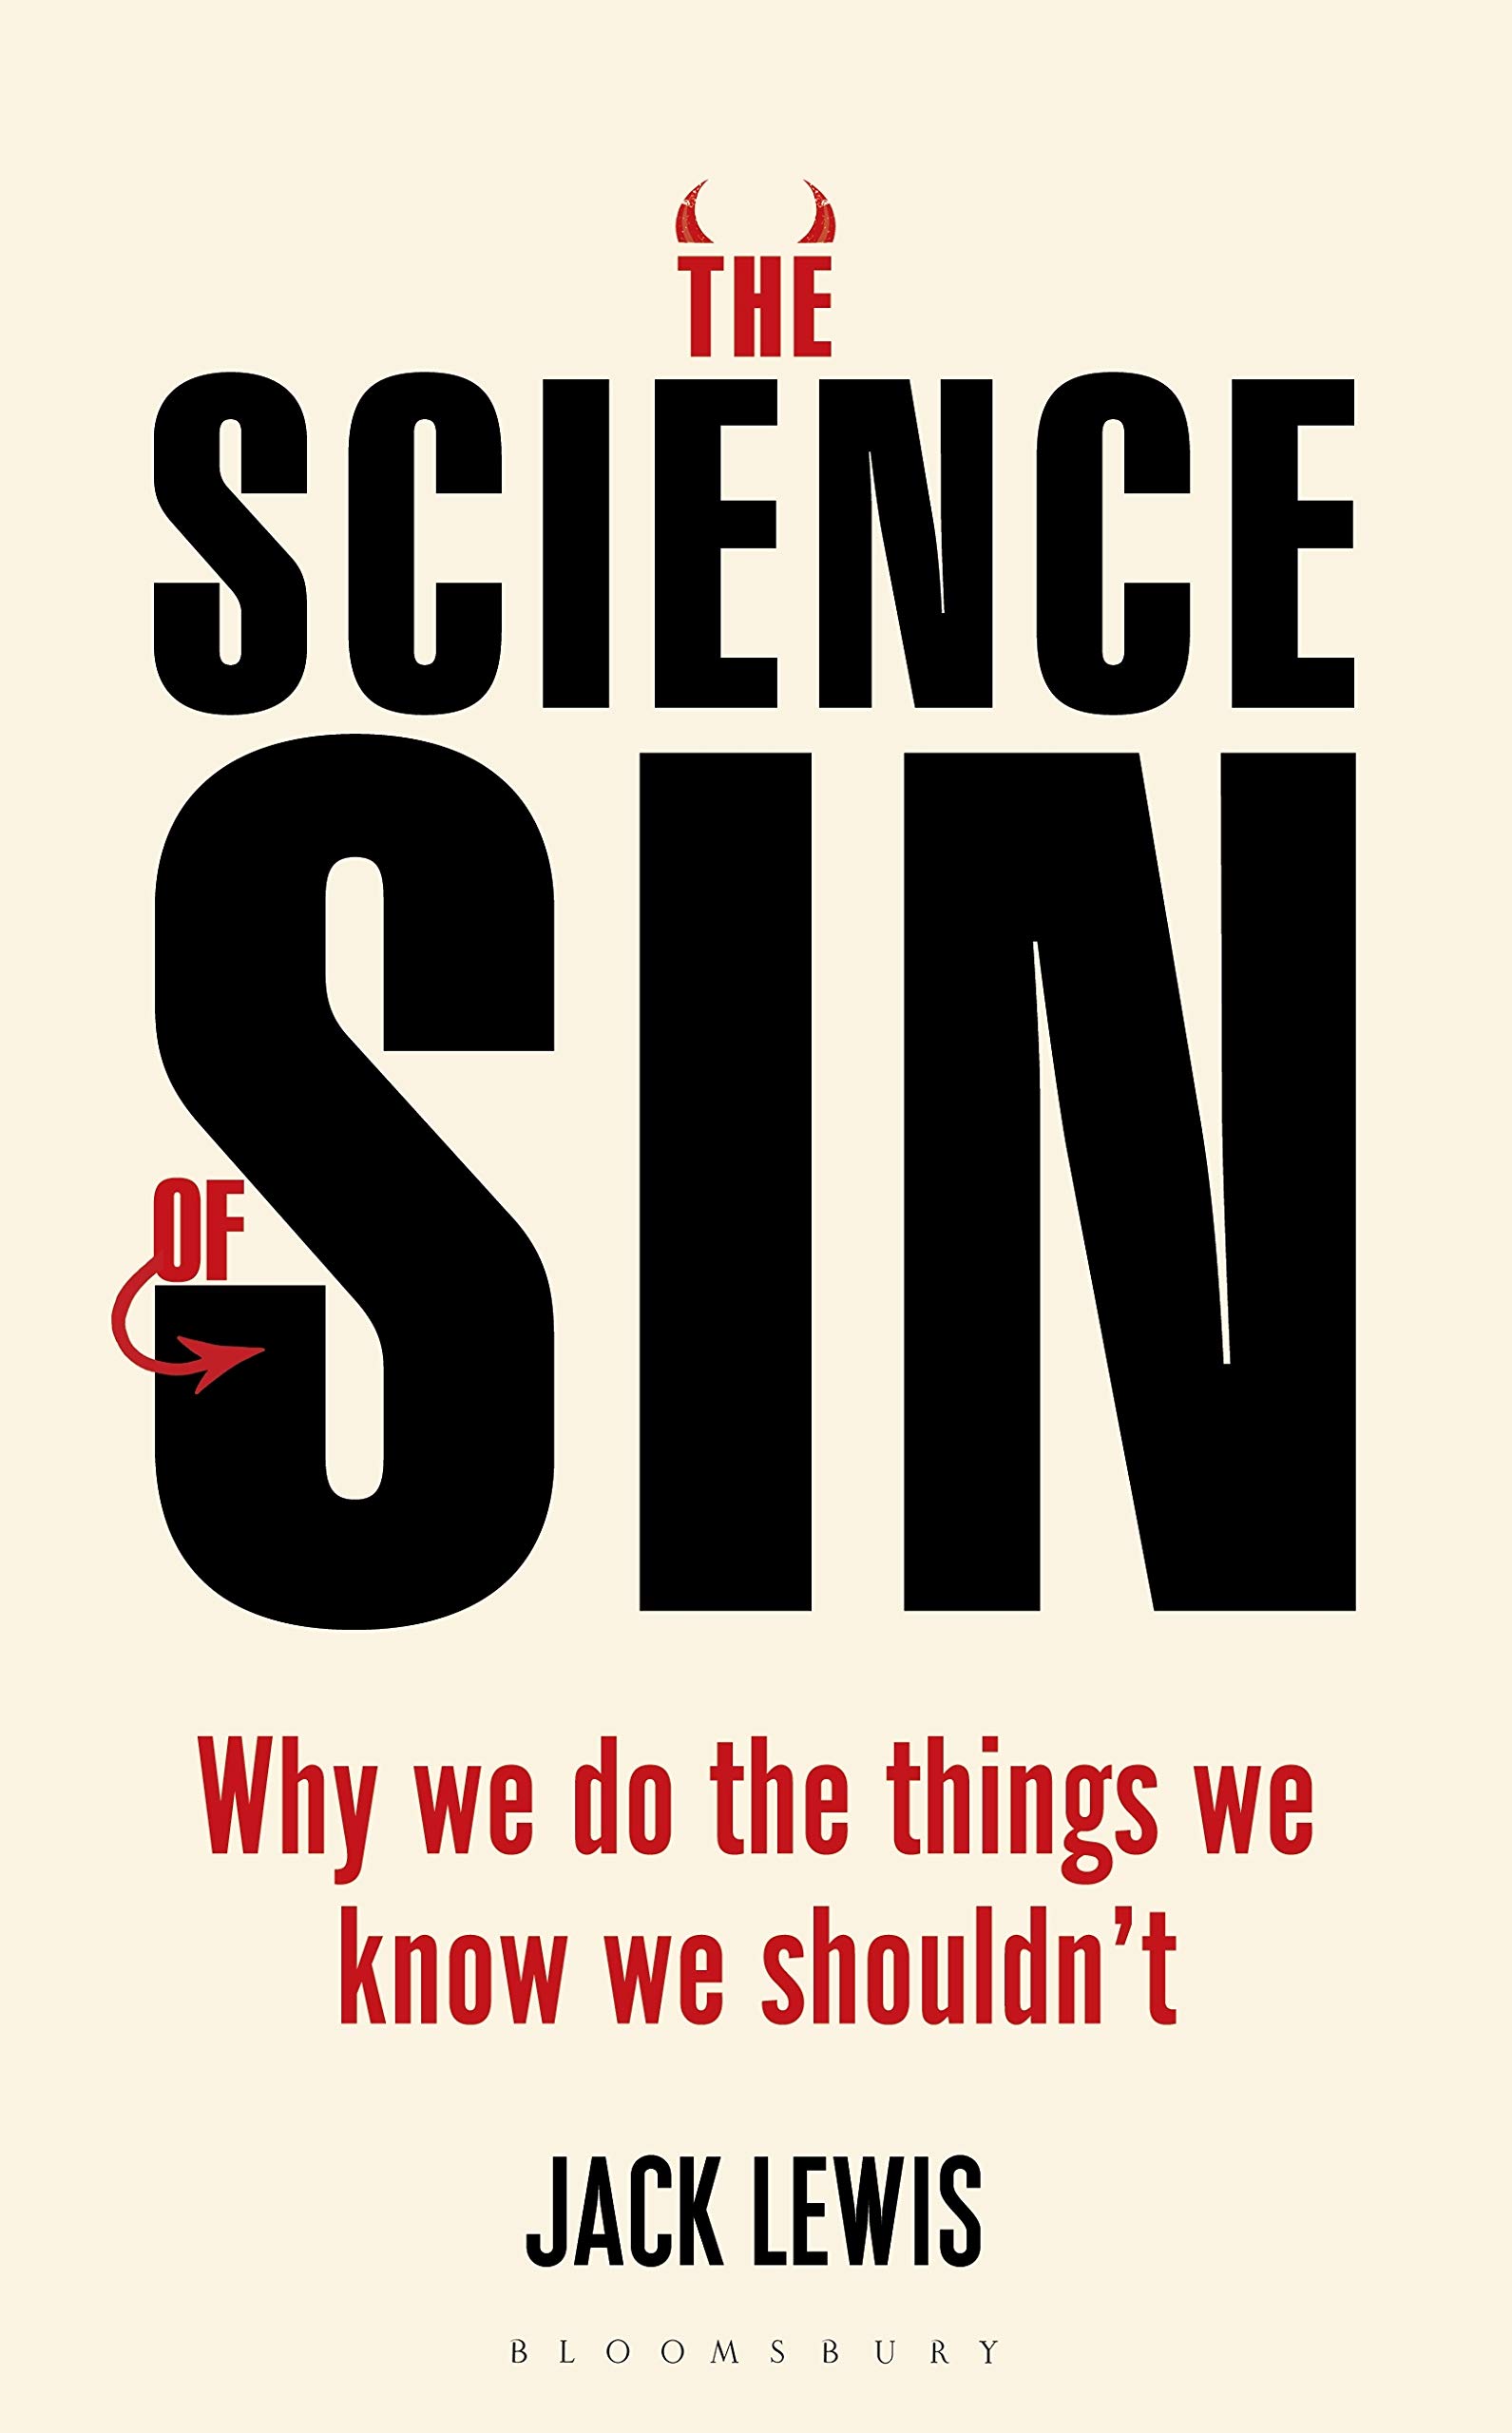 The Science of Sin: Why We Do The Things We Know We Shouldn't